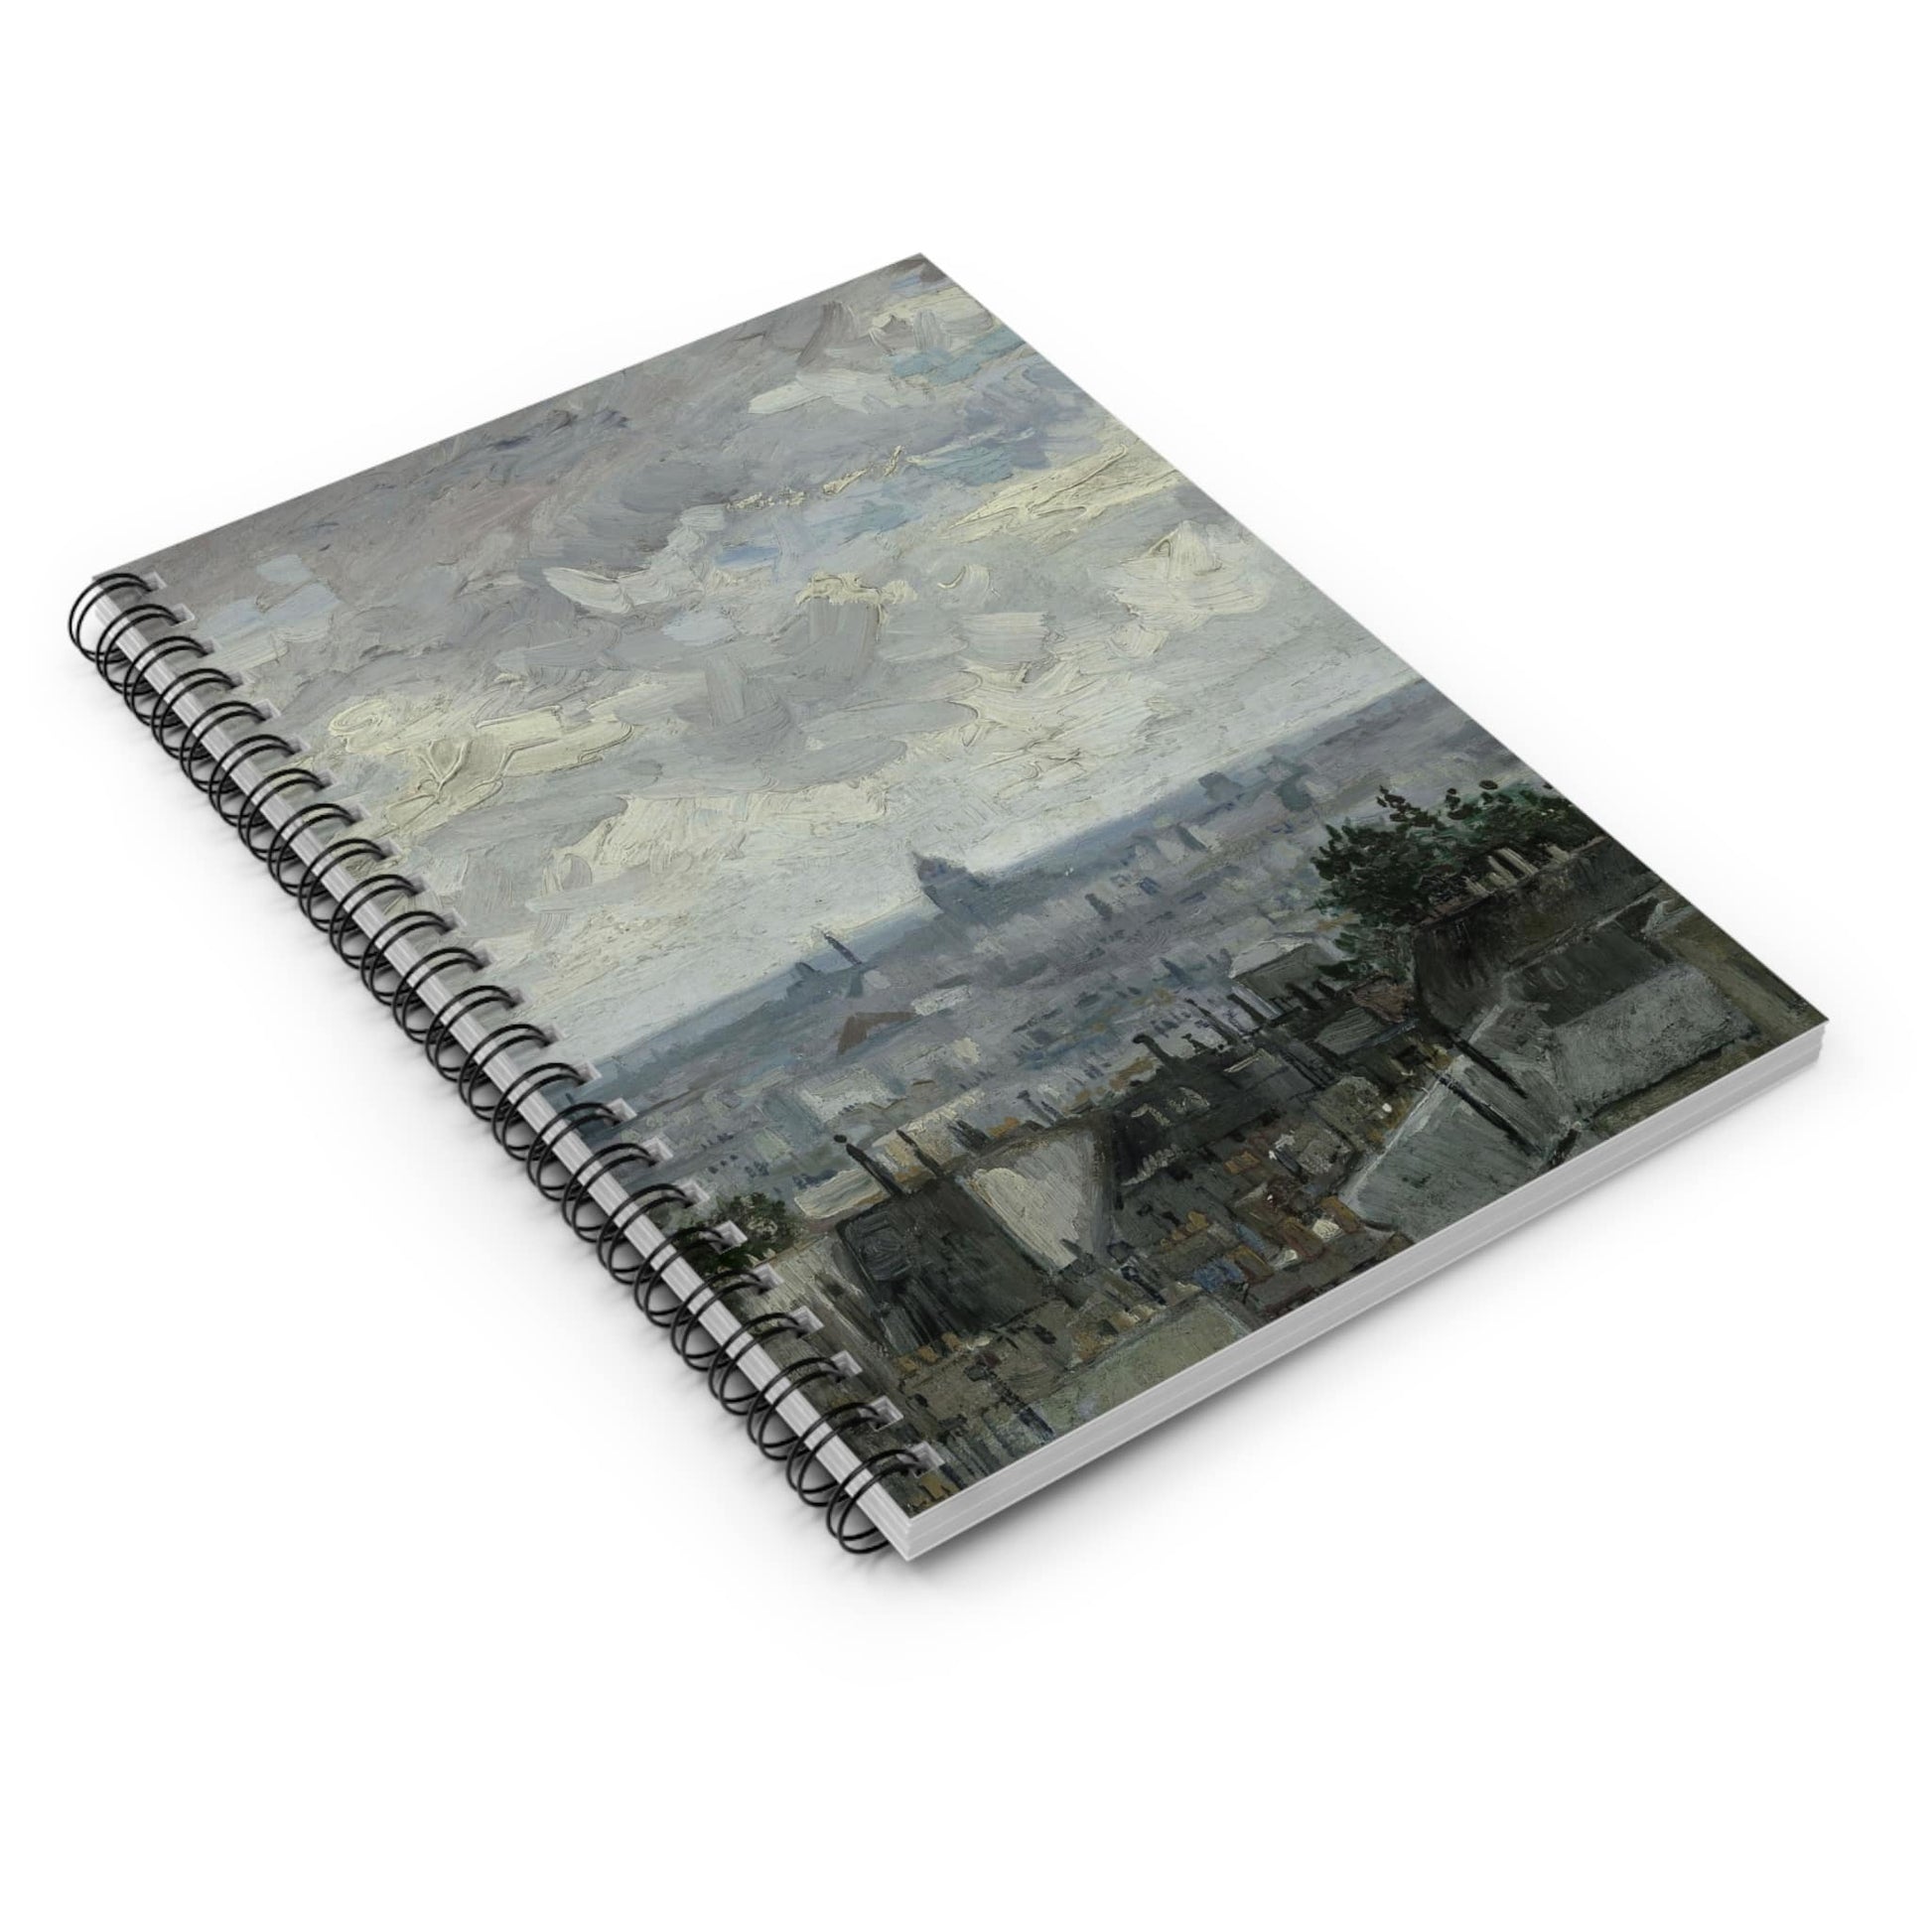 Revitalized Vintage Spiral Notebook Laying Flat on White Surface